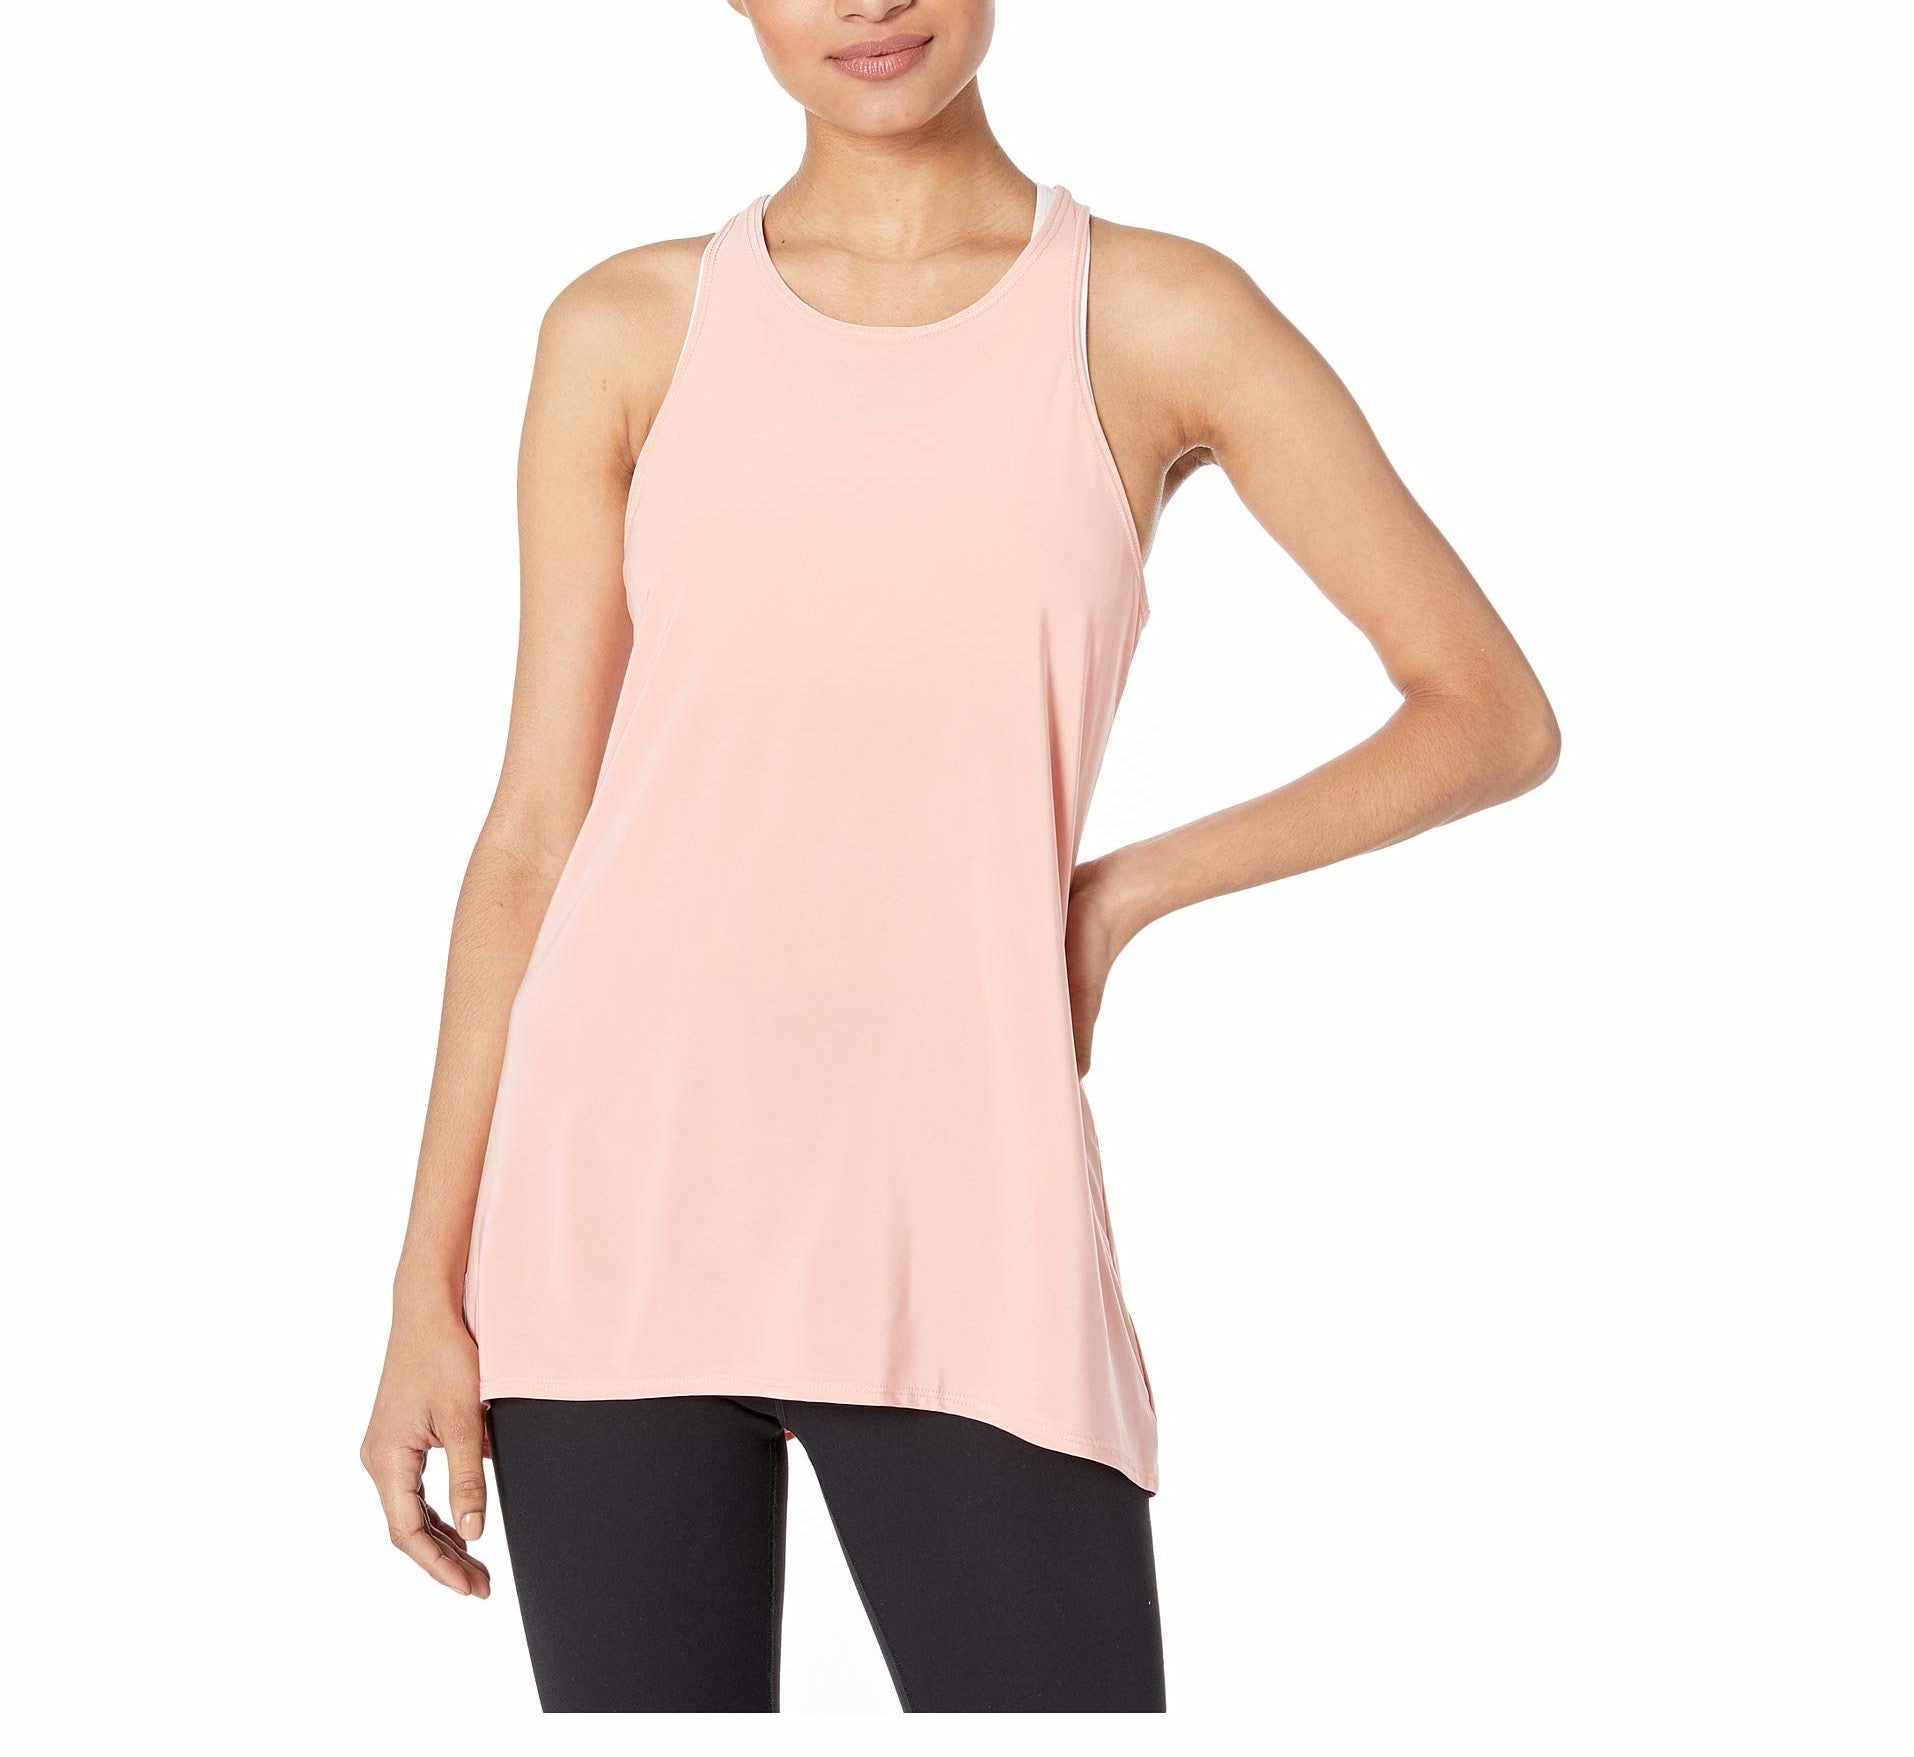 Grab Your Last Chance Stylish Sports Tops - Fitness Fashions